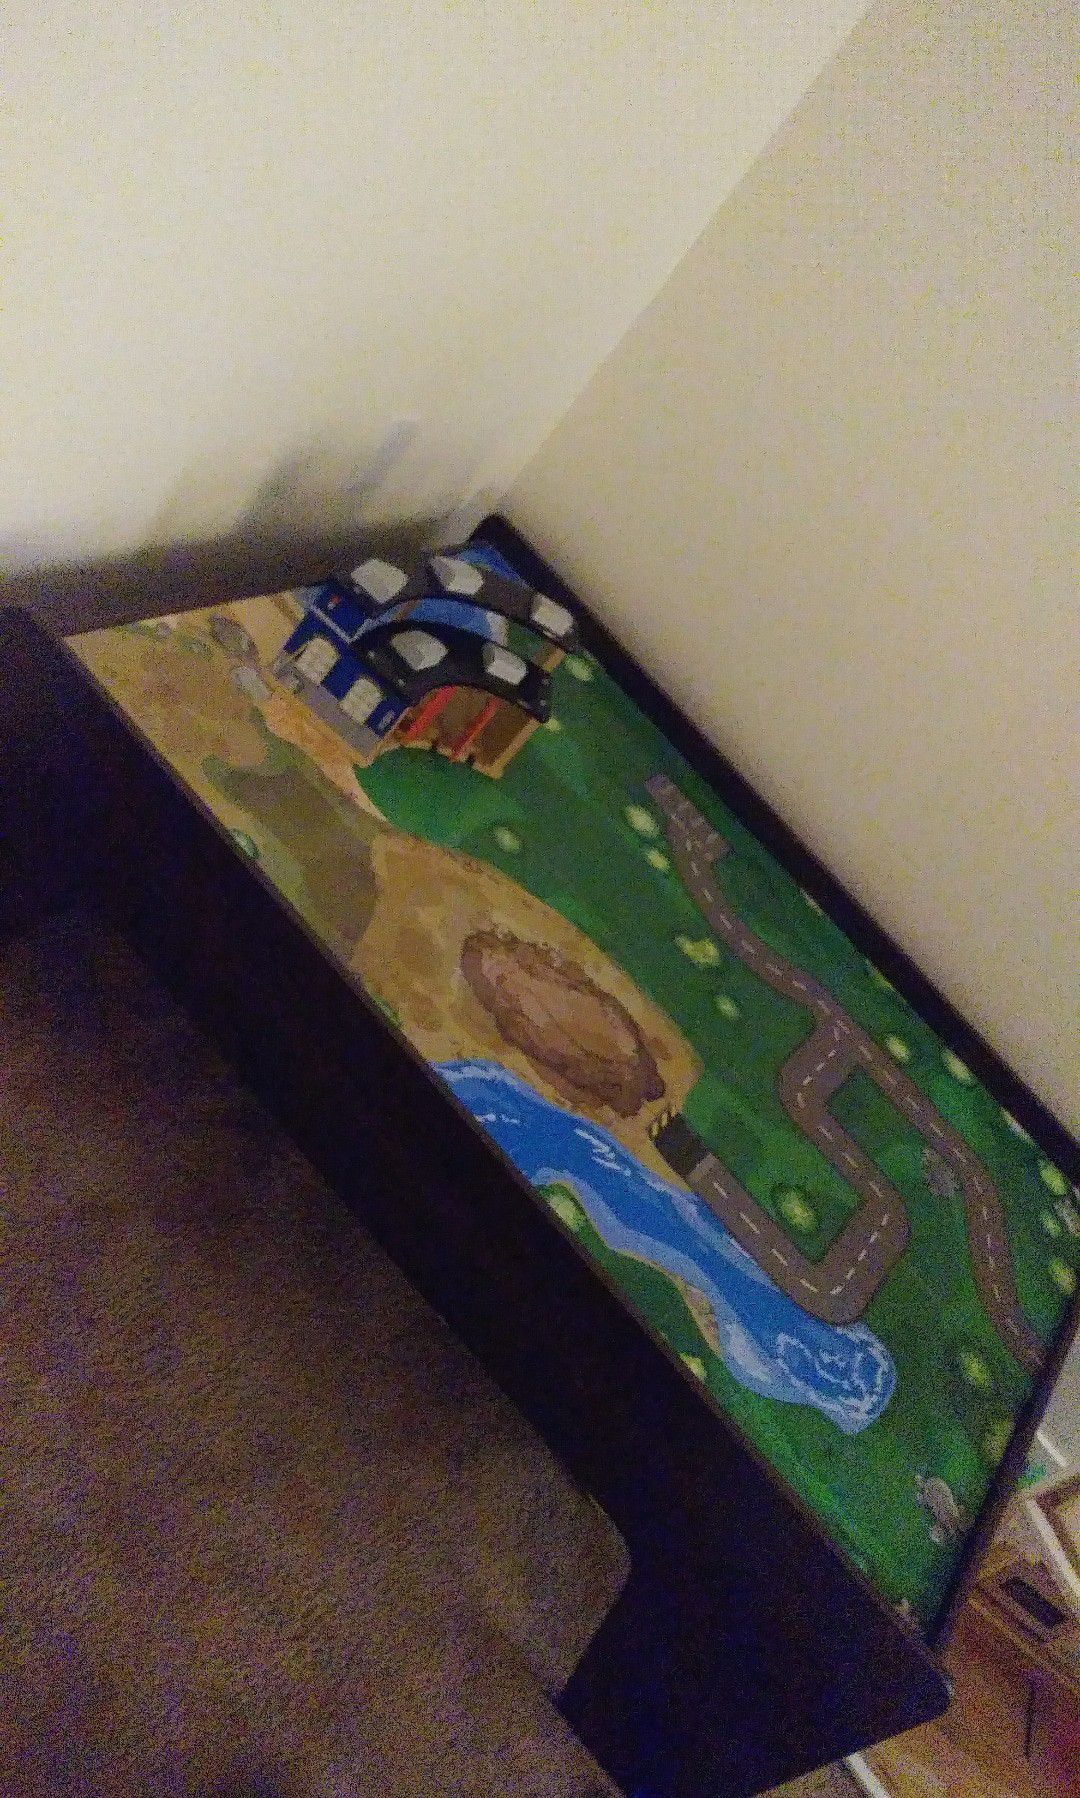 Kids toy table